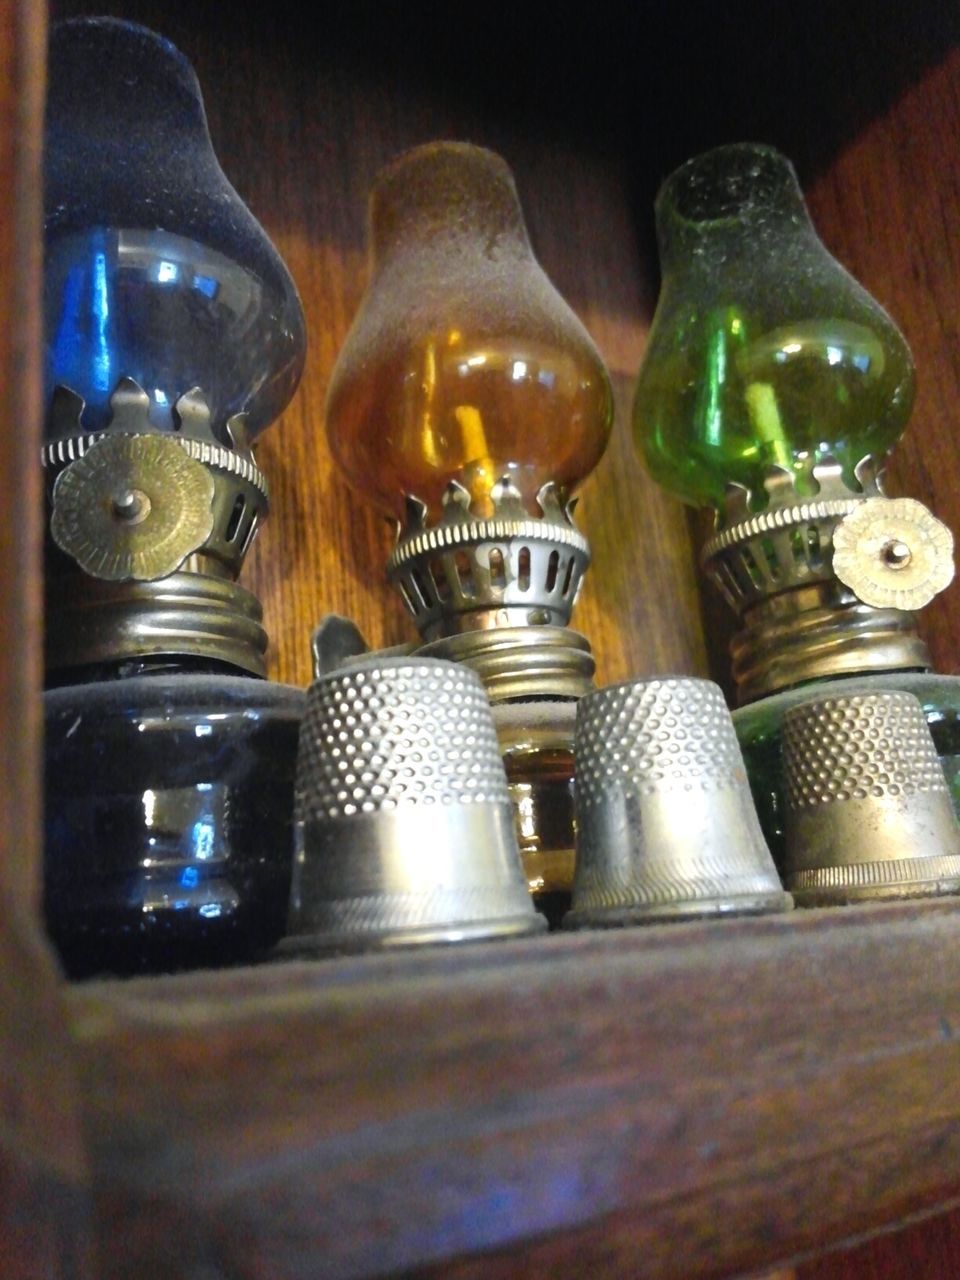 CLOSE-UP OF CANDLES IN SHELF